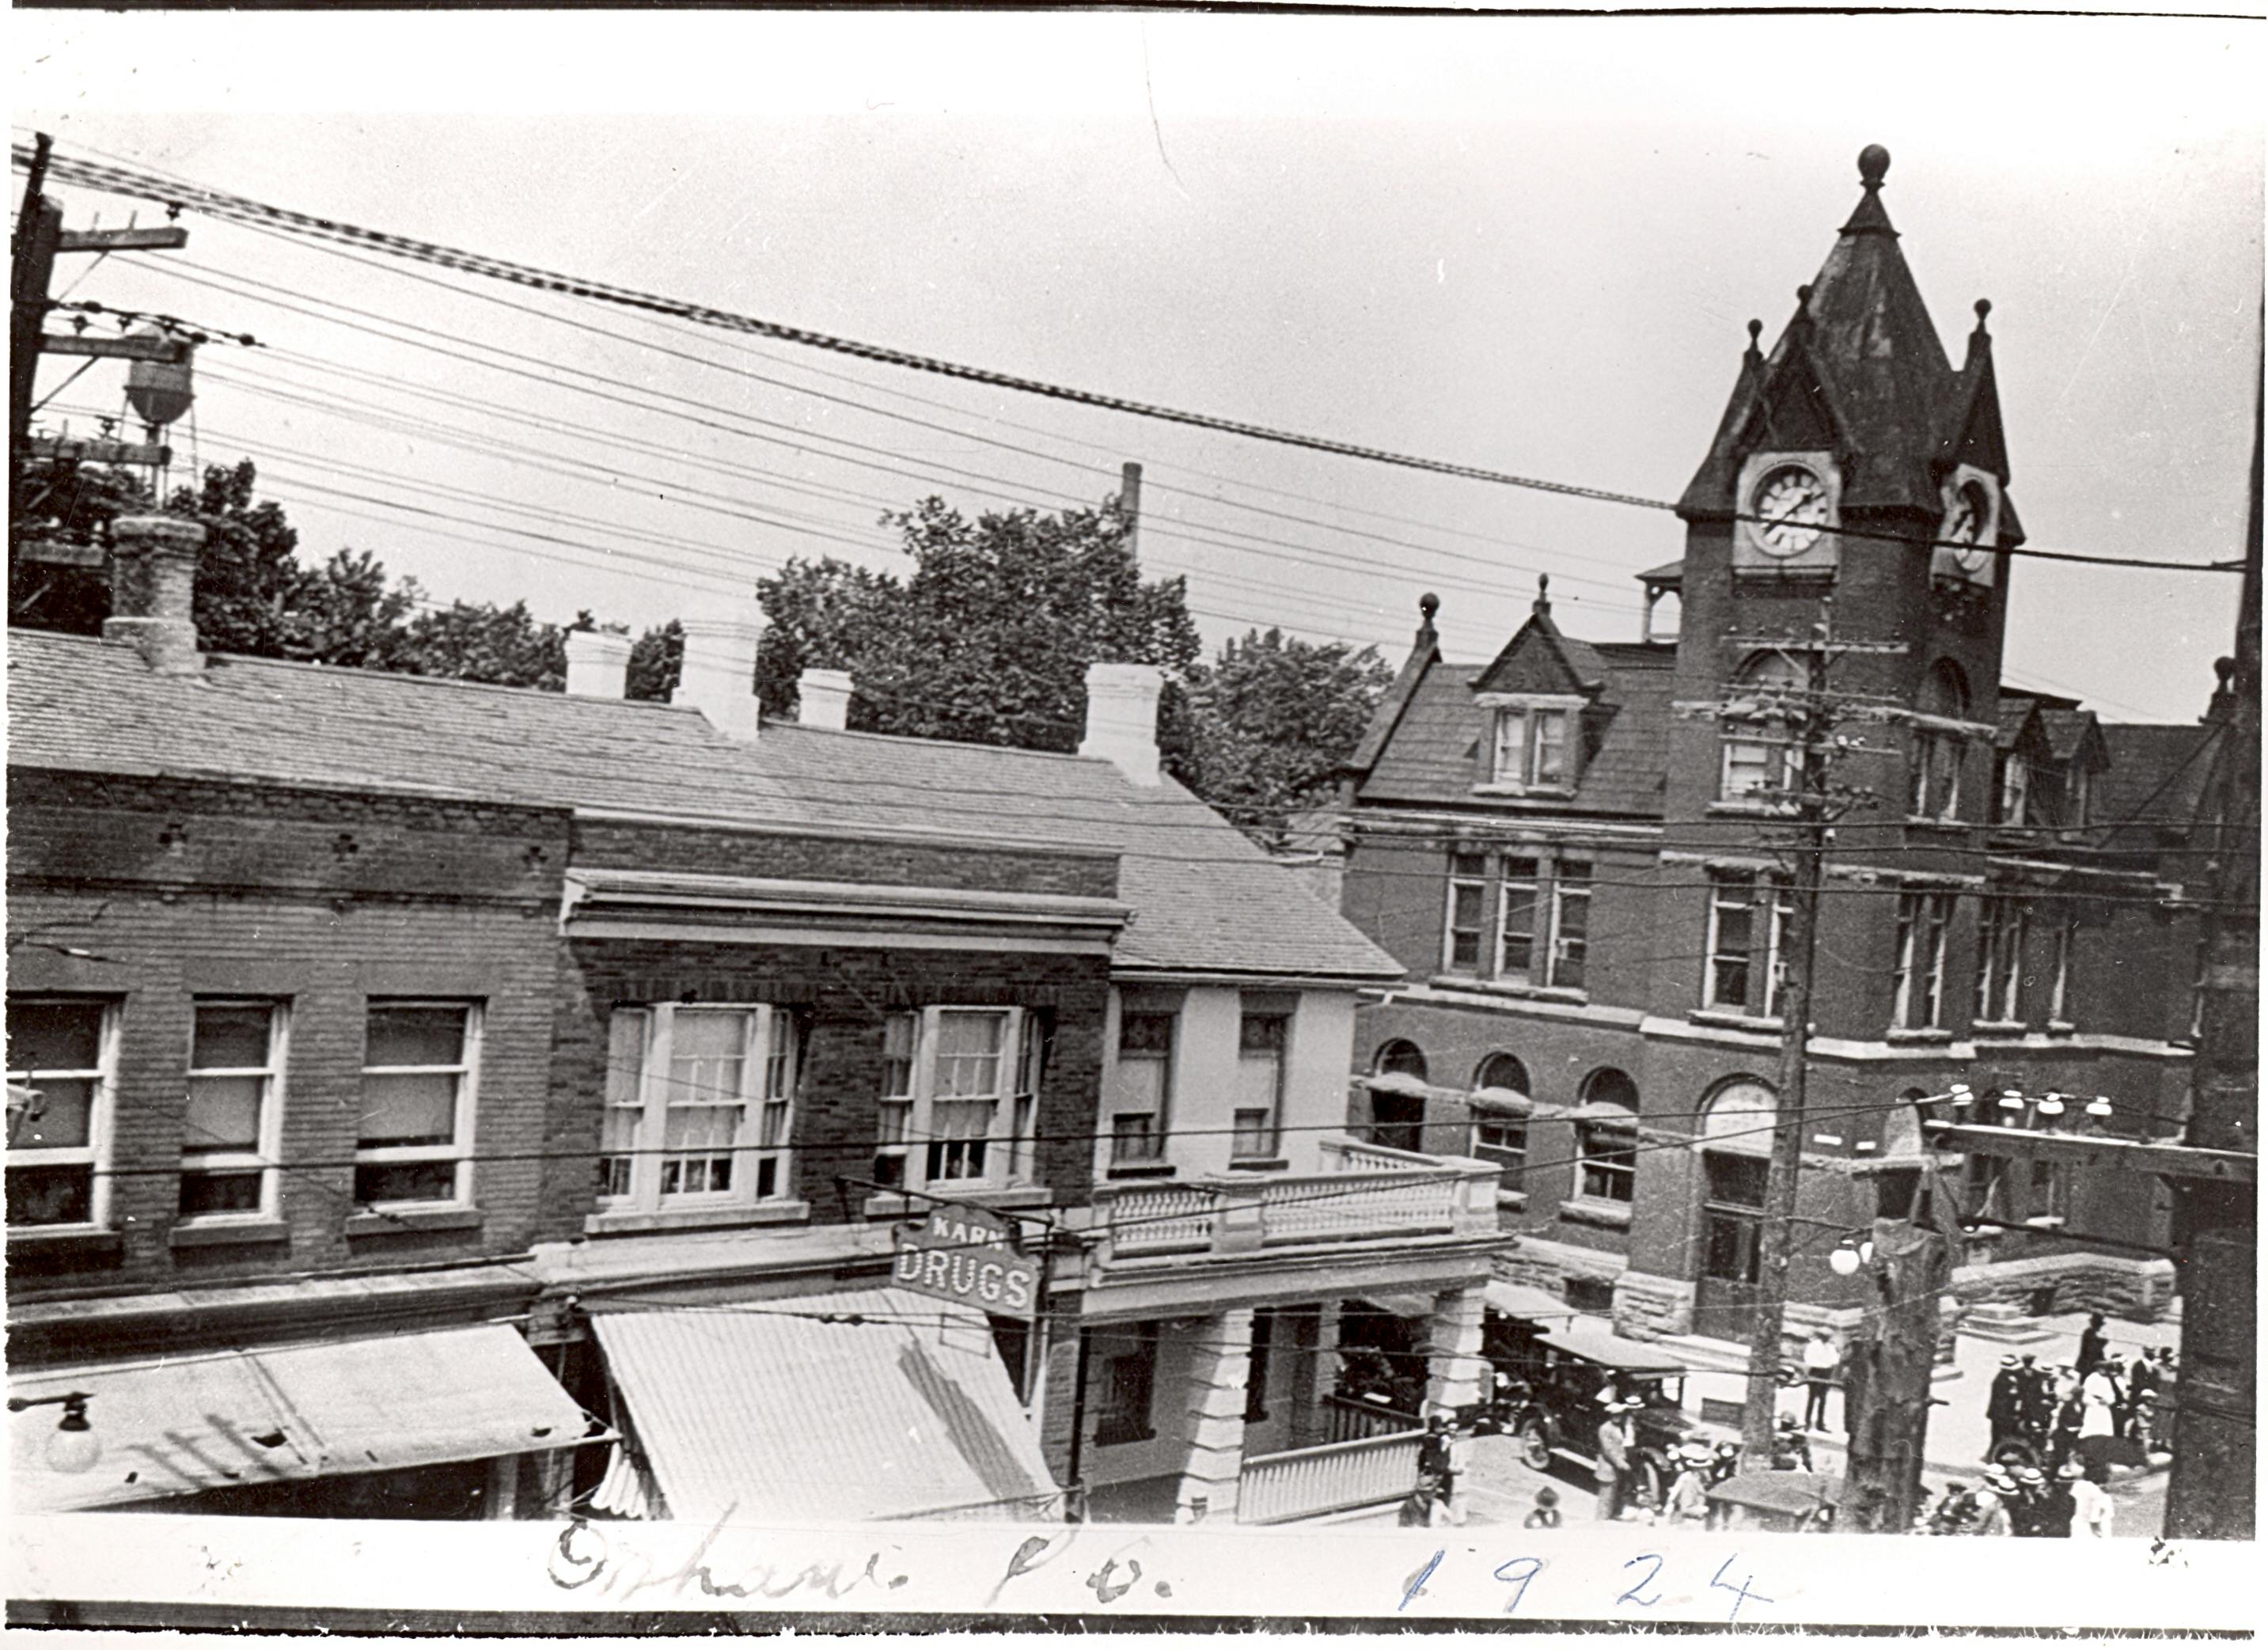 Old Post Office - The Thomas Bouckley Collection - The Robert McLaughlin Gallery, Oshawa - 0071